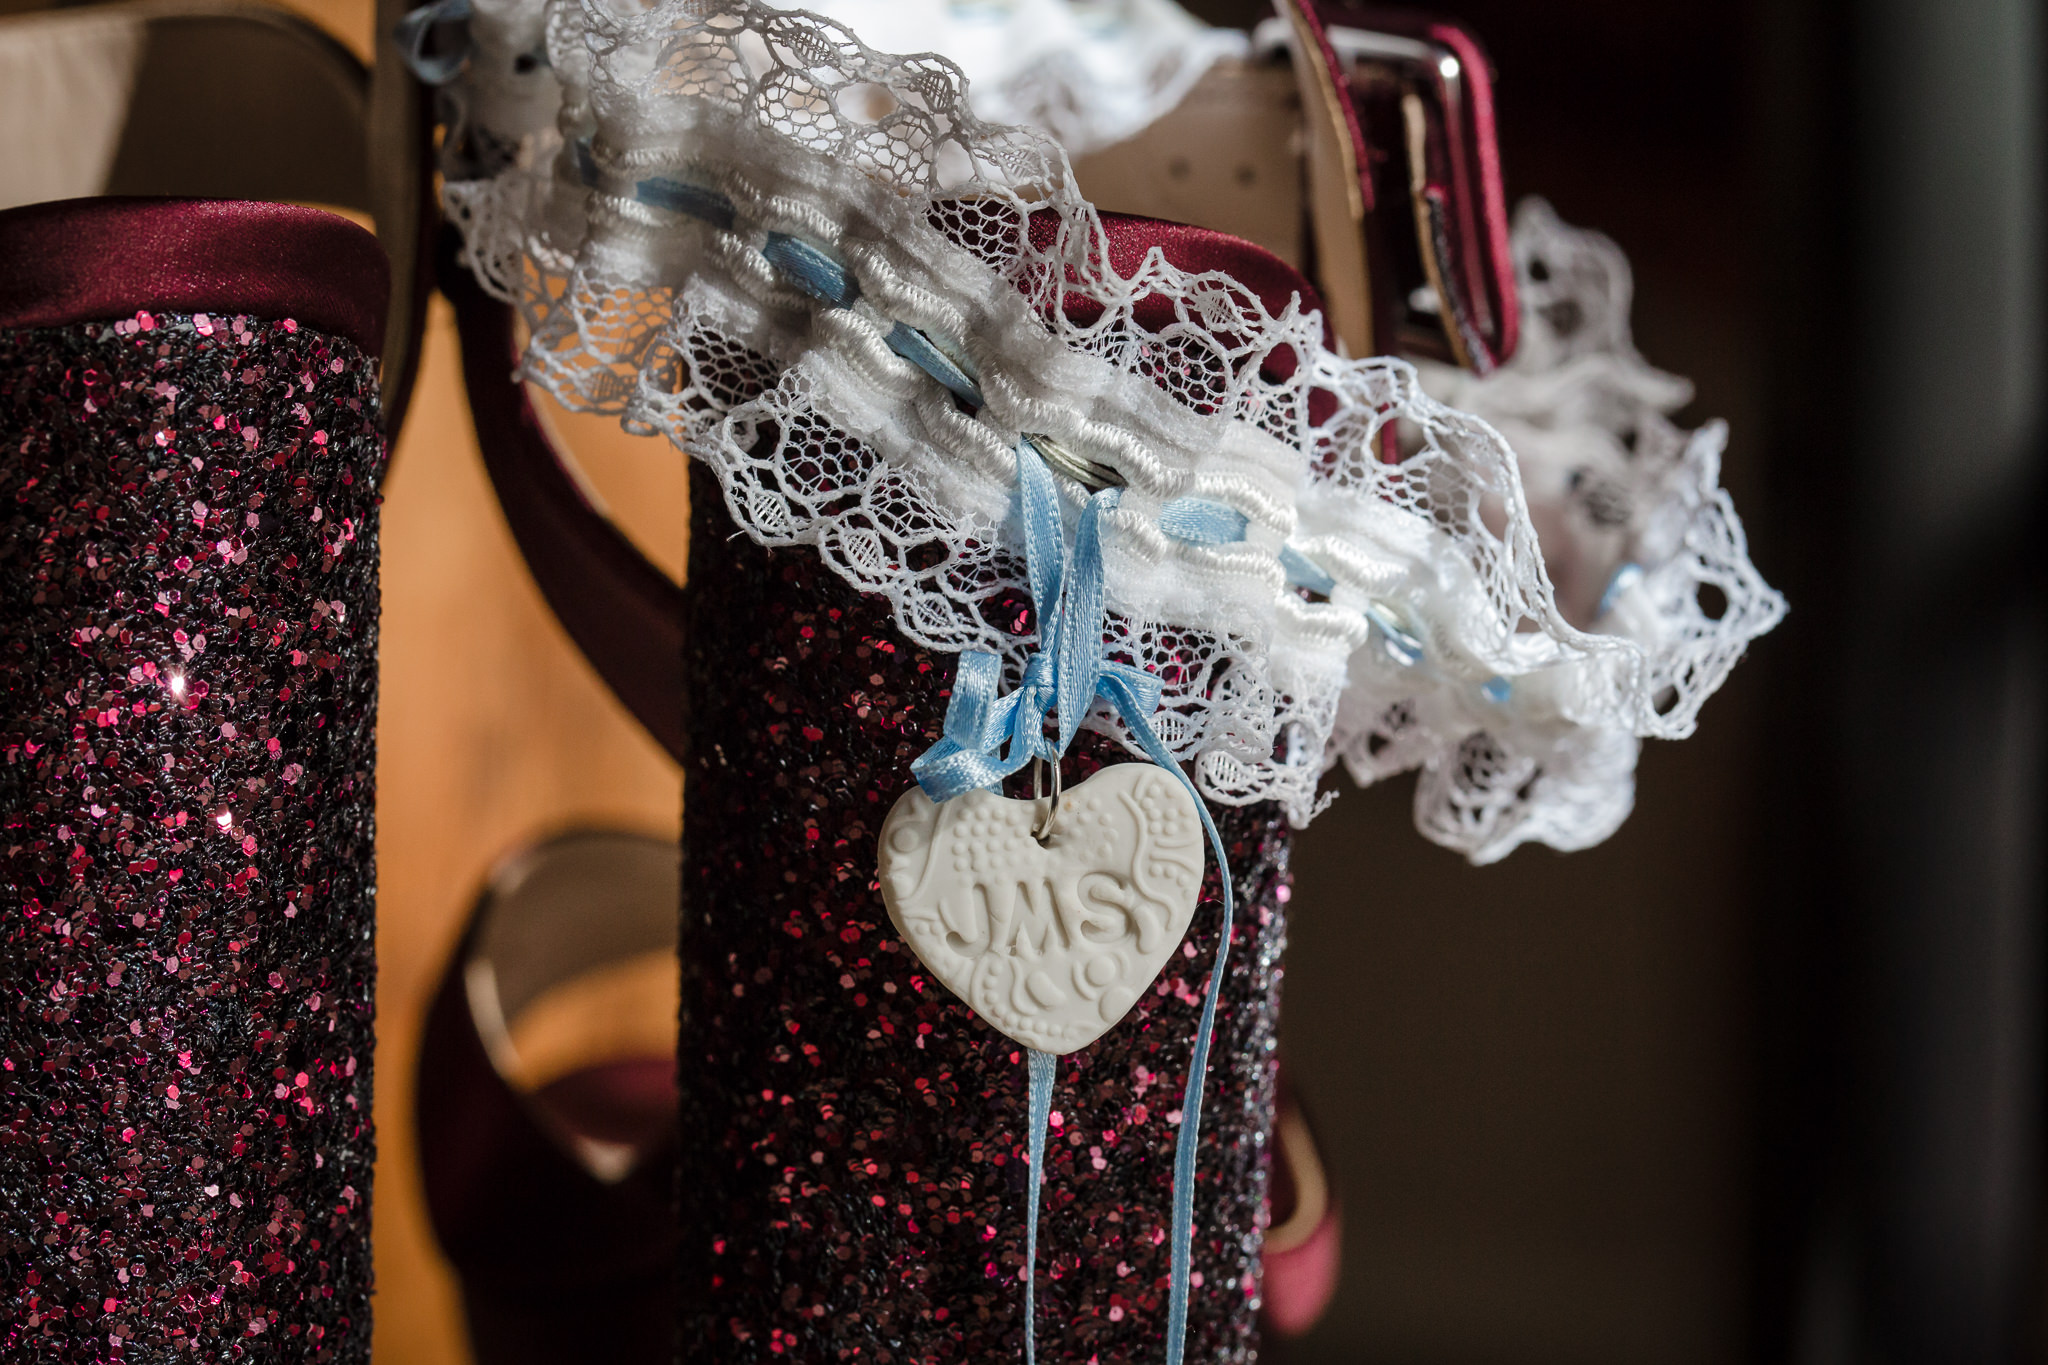 Personalized token hangs from bride's white garter